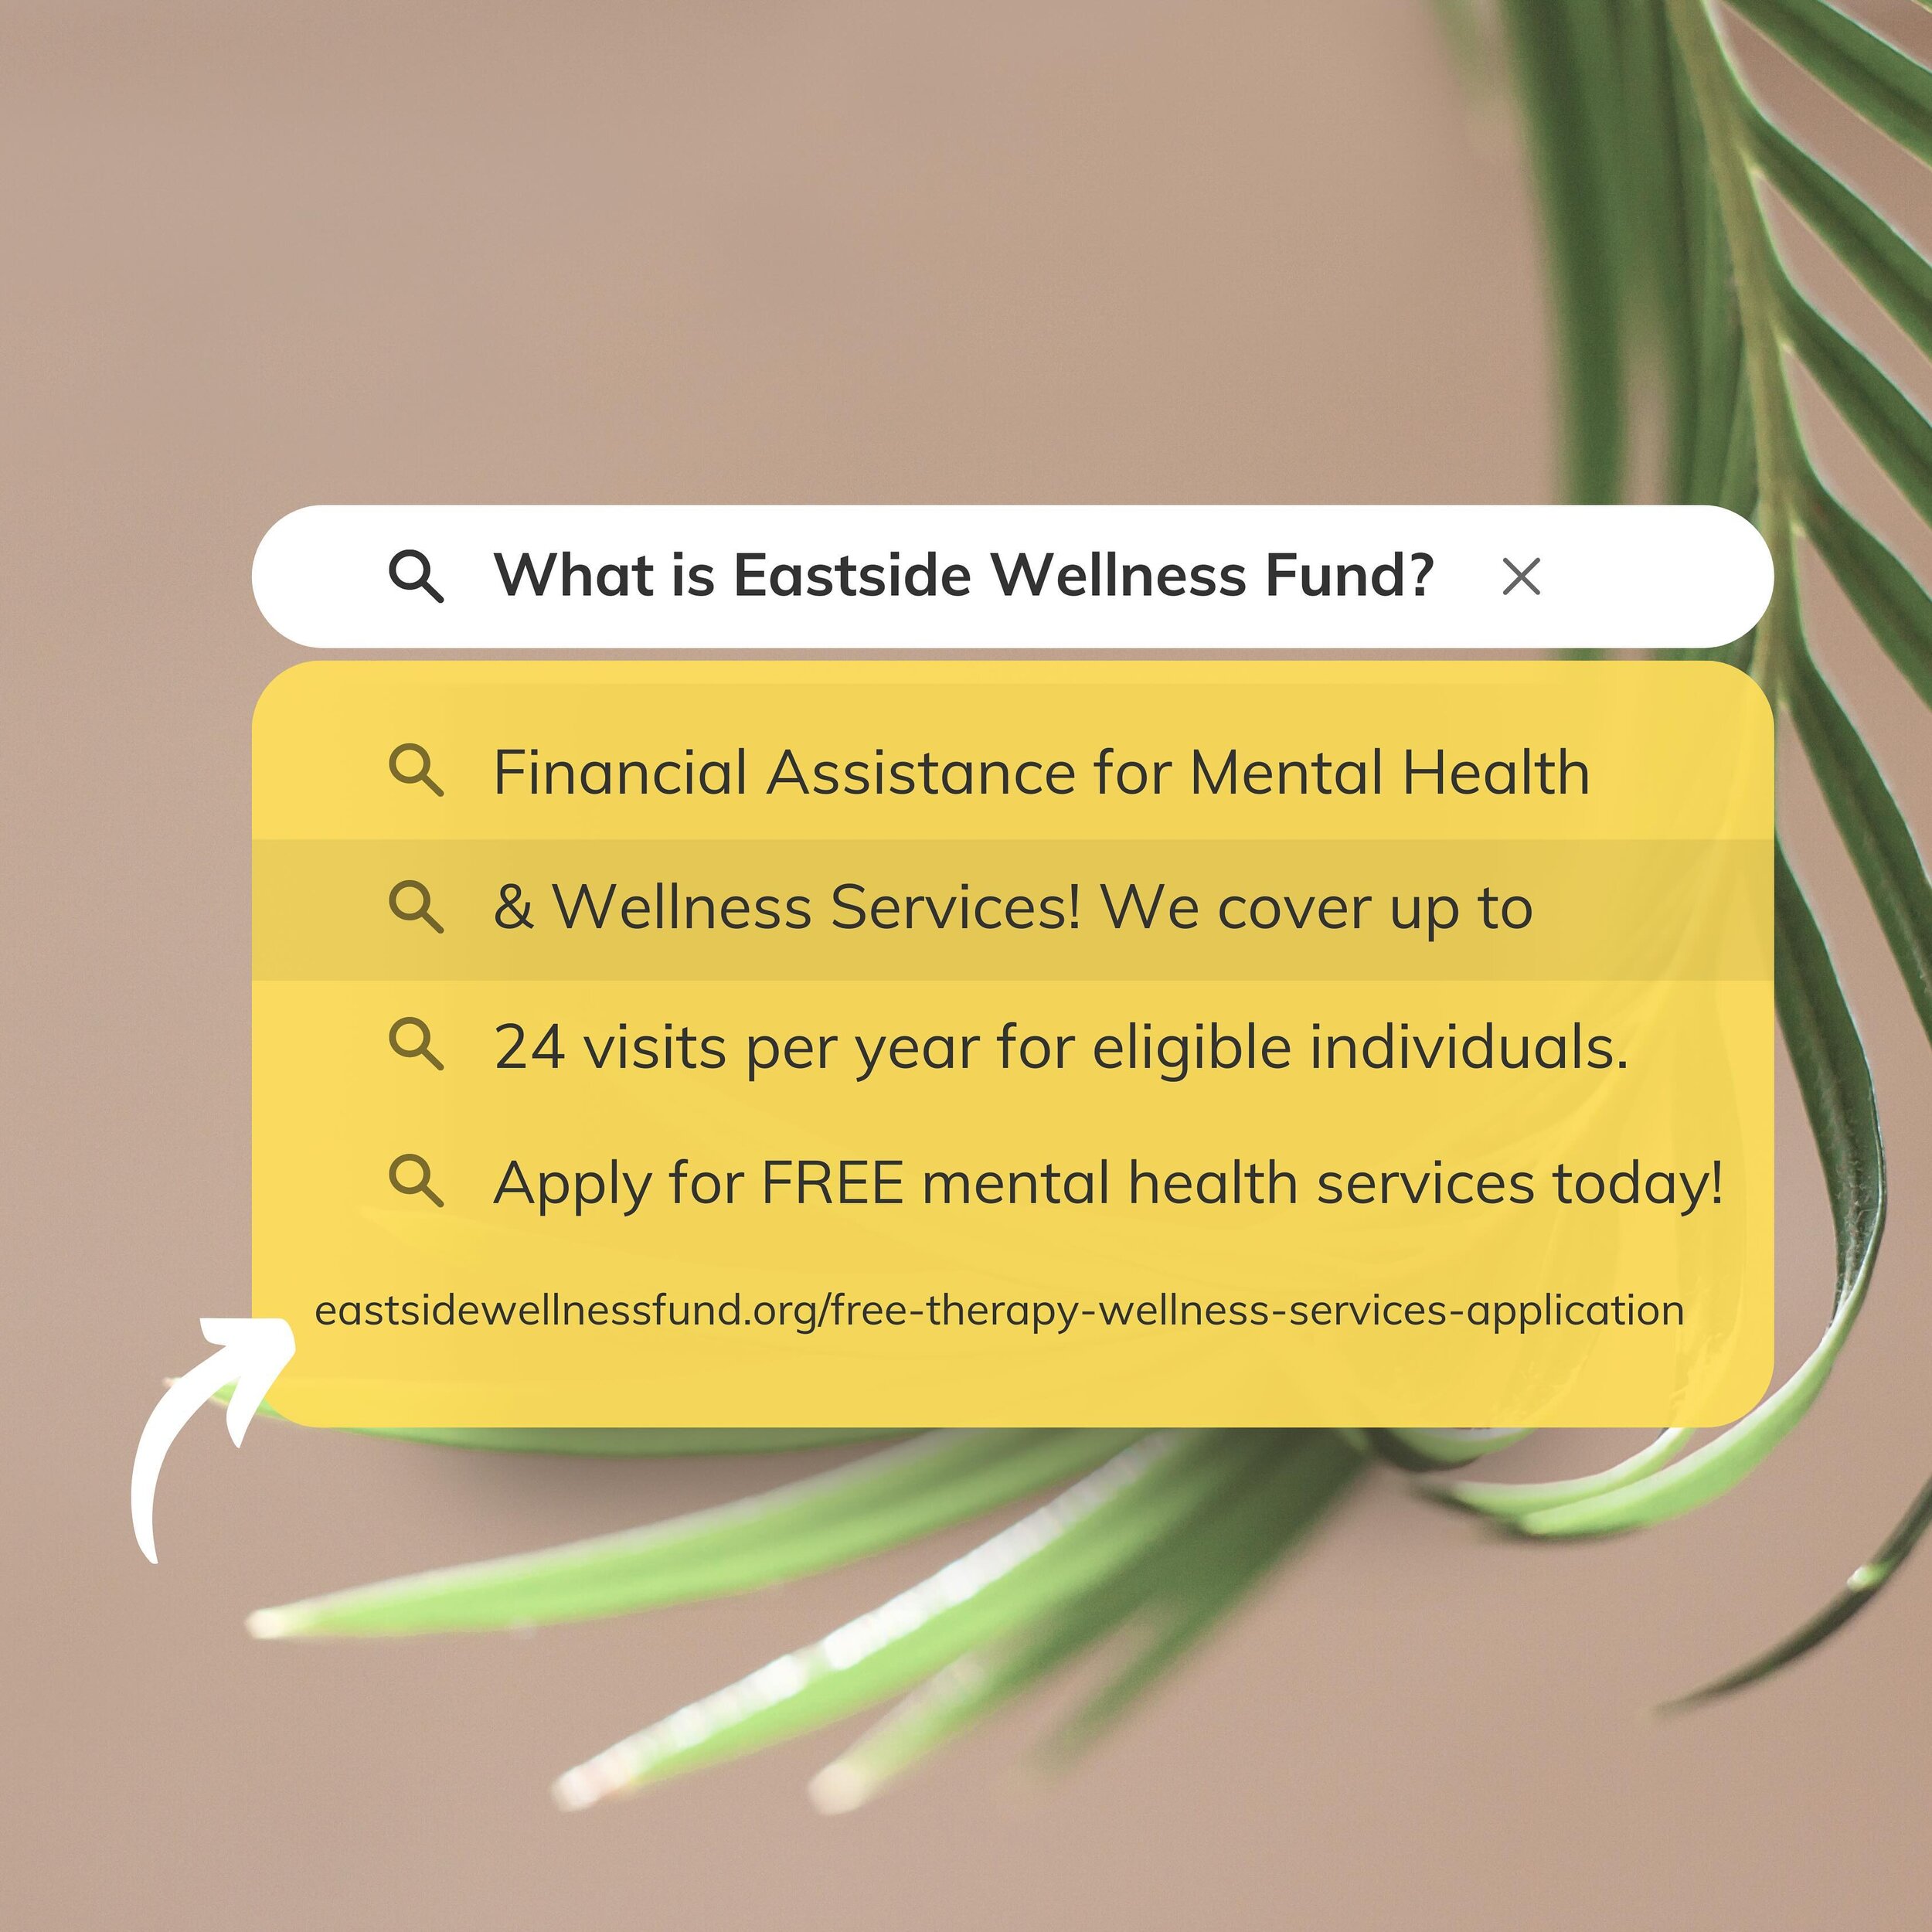 Exciting news! Applications are now open for Eastside Wellness Fund, offering free mental health services to eligible individuals in Washington state. Selection is based on need and operates on a first-come, first-served basis. Visit our website for 